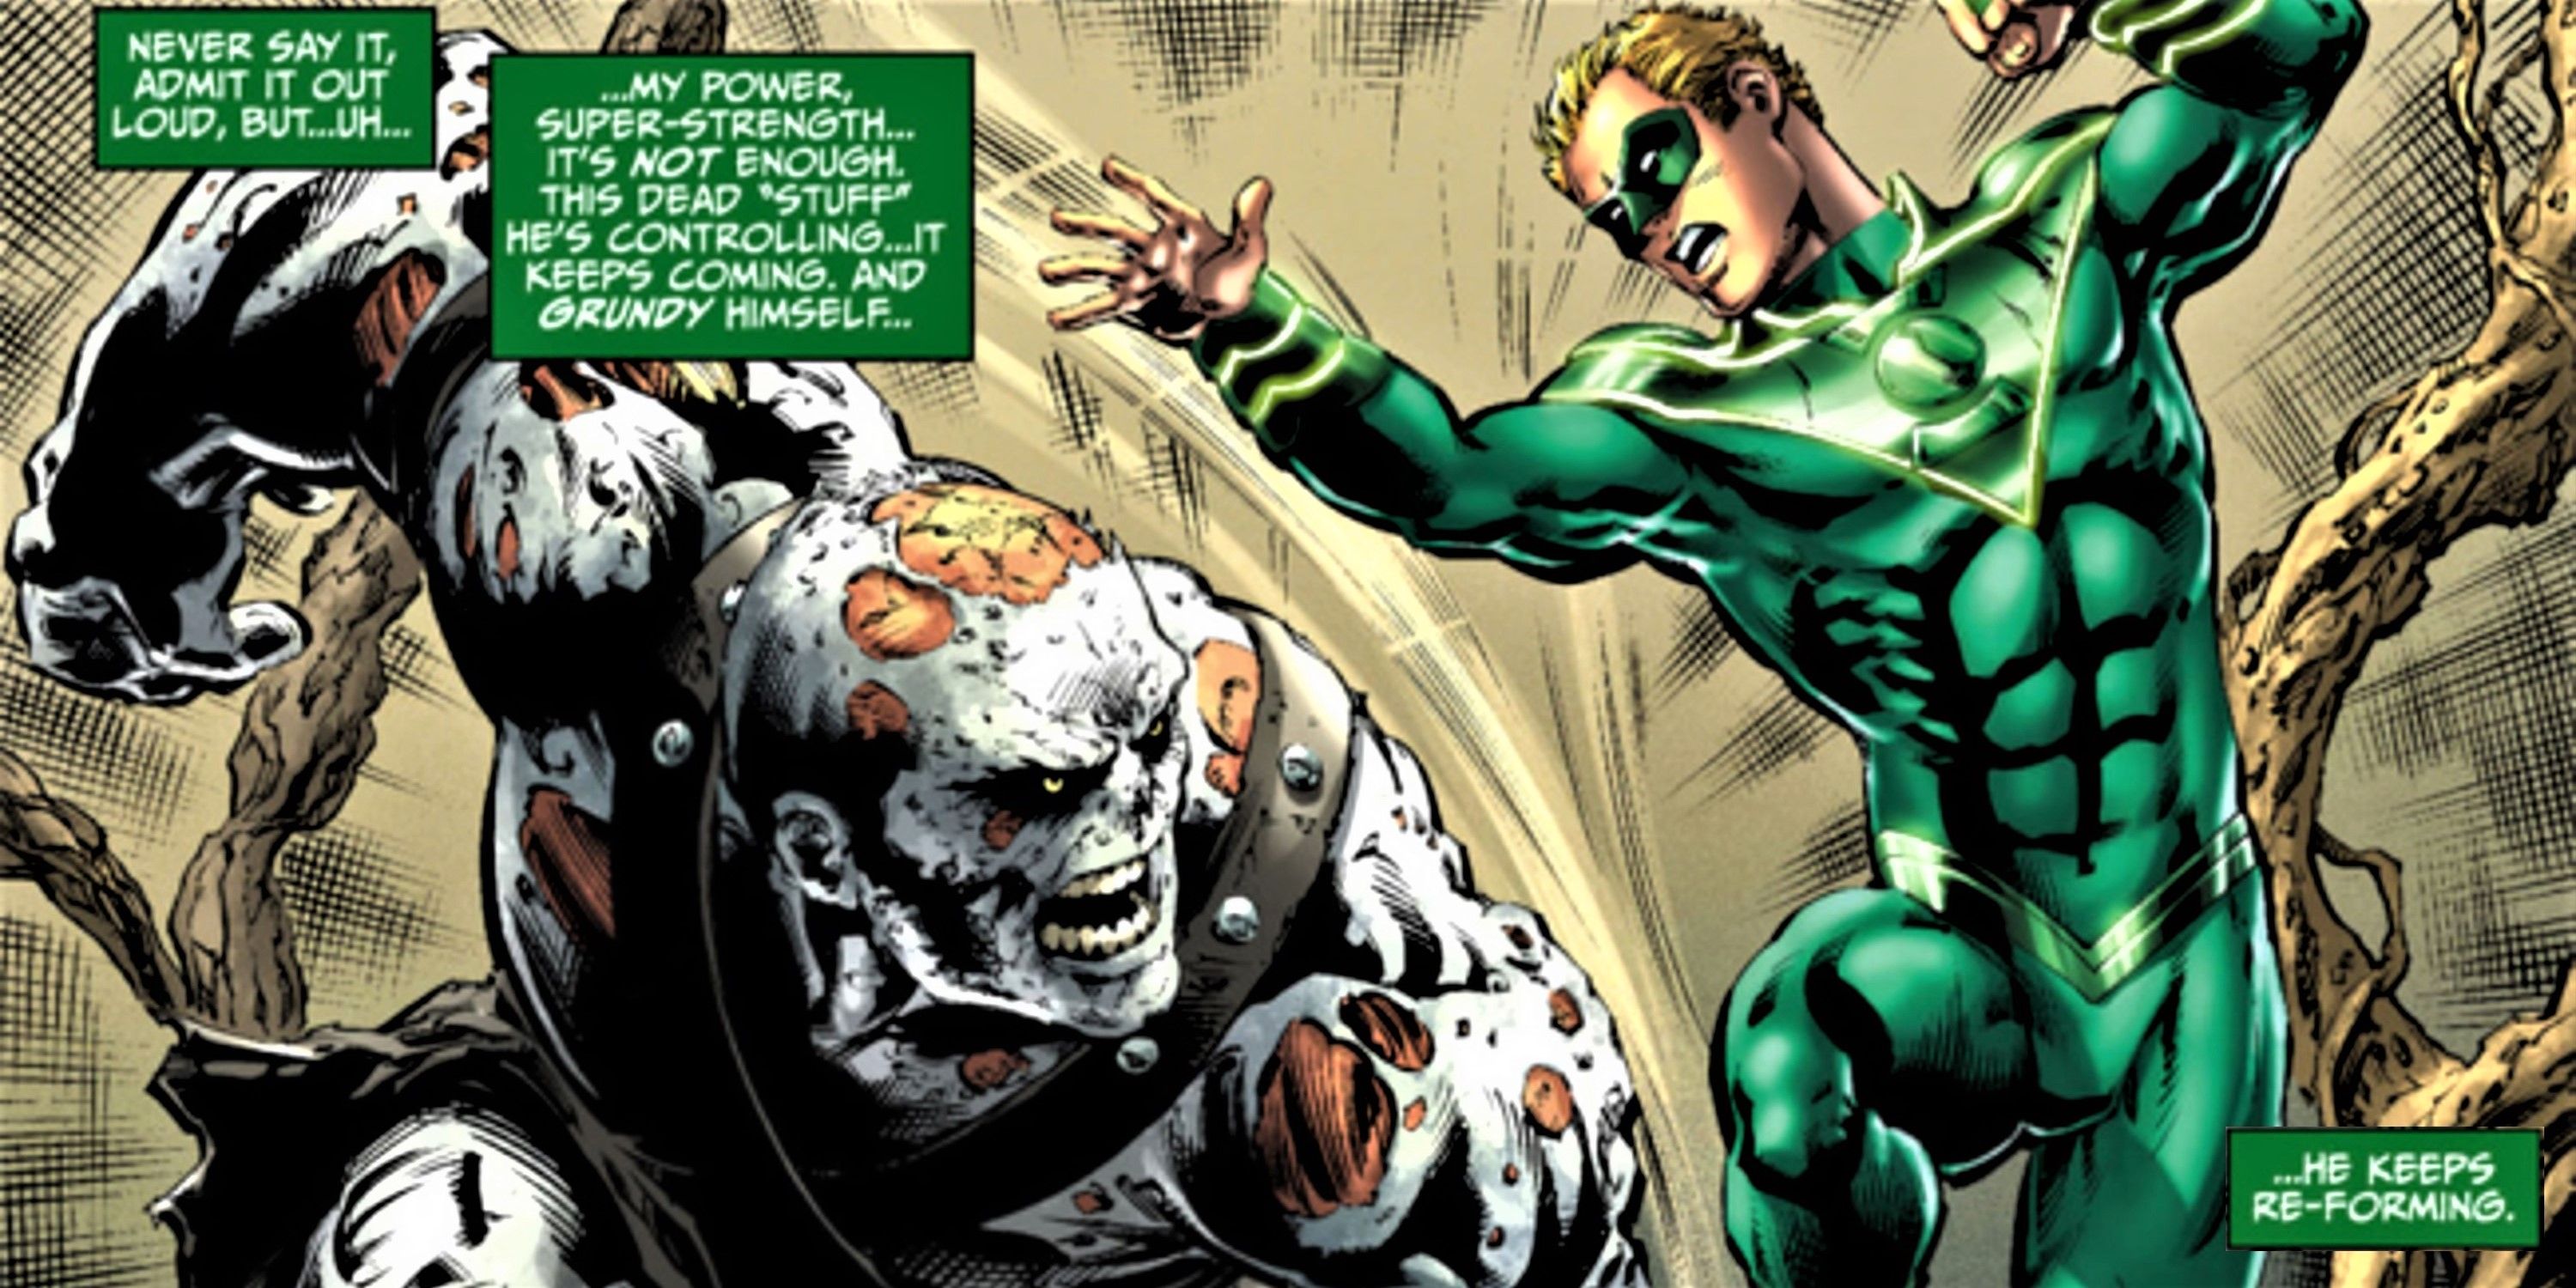 Alan Scott fights Solomon Grundy, who keeps regrouping after his death